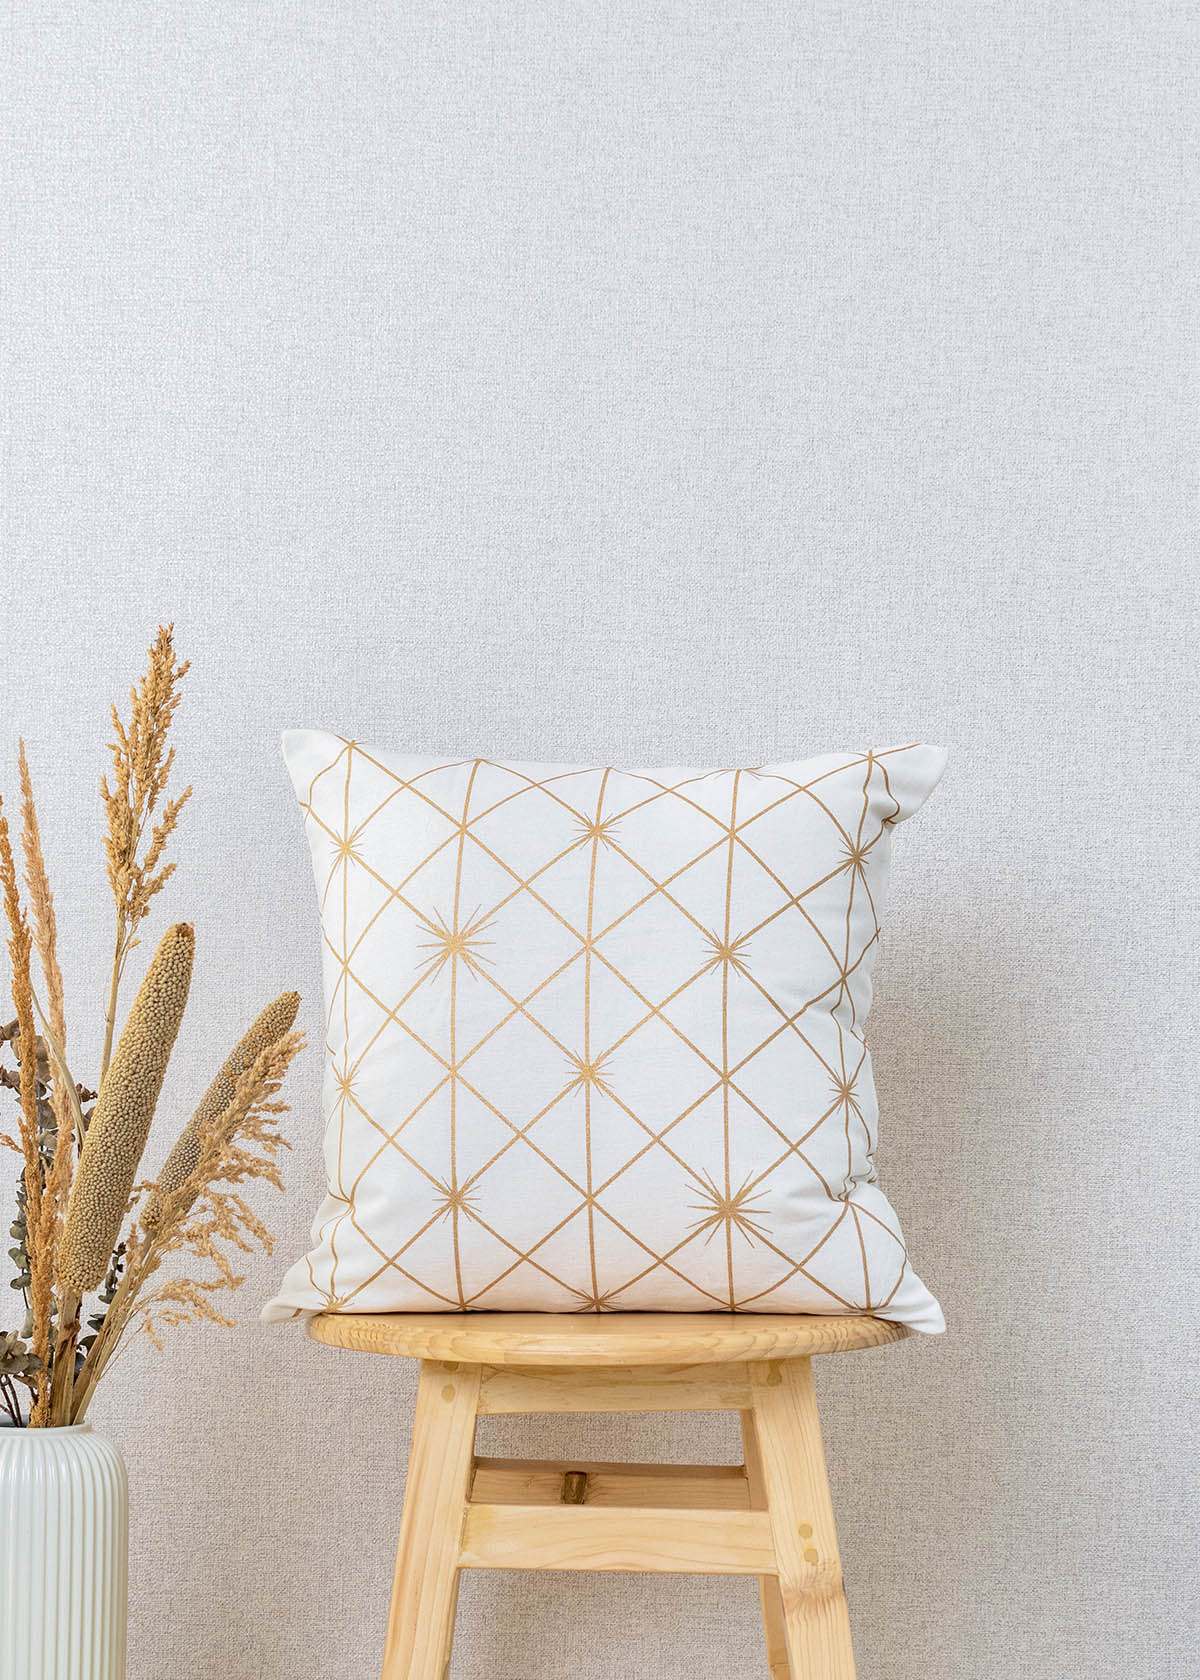 Stardust 100% cotton customisable geometric cushion cover for sofa - Pale white & Gold